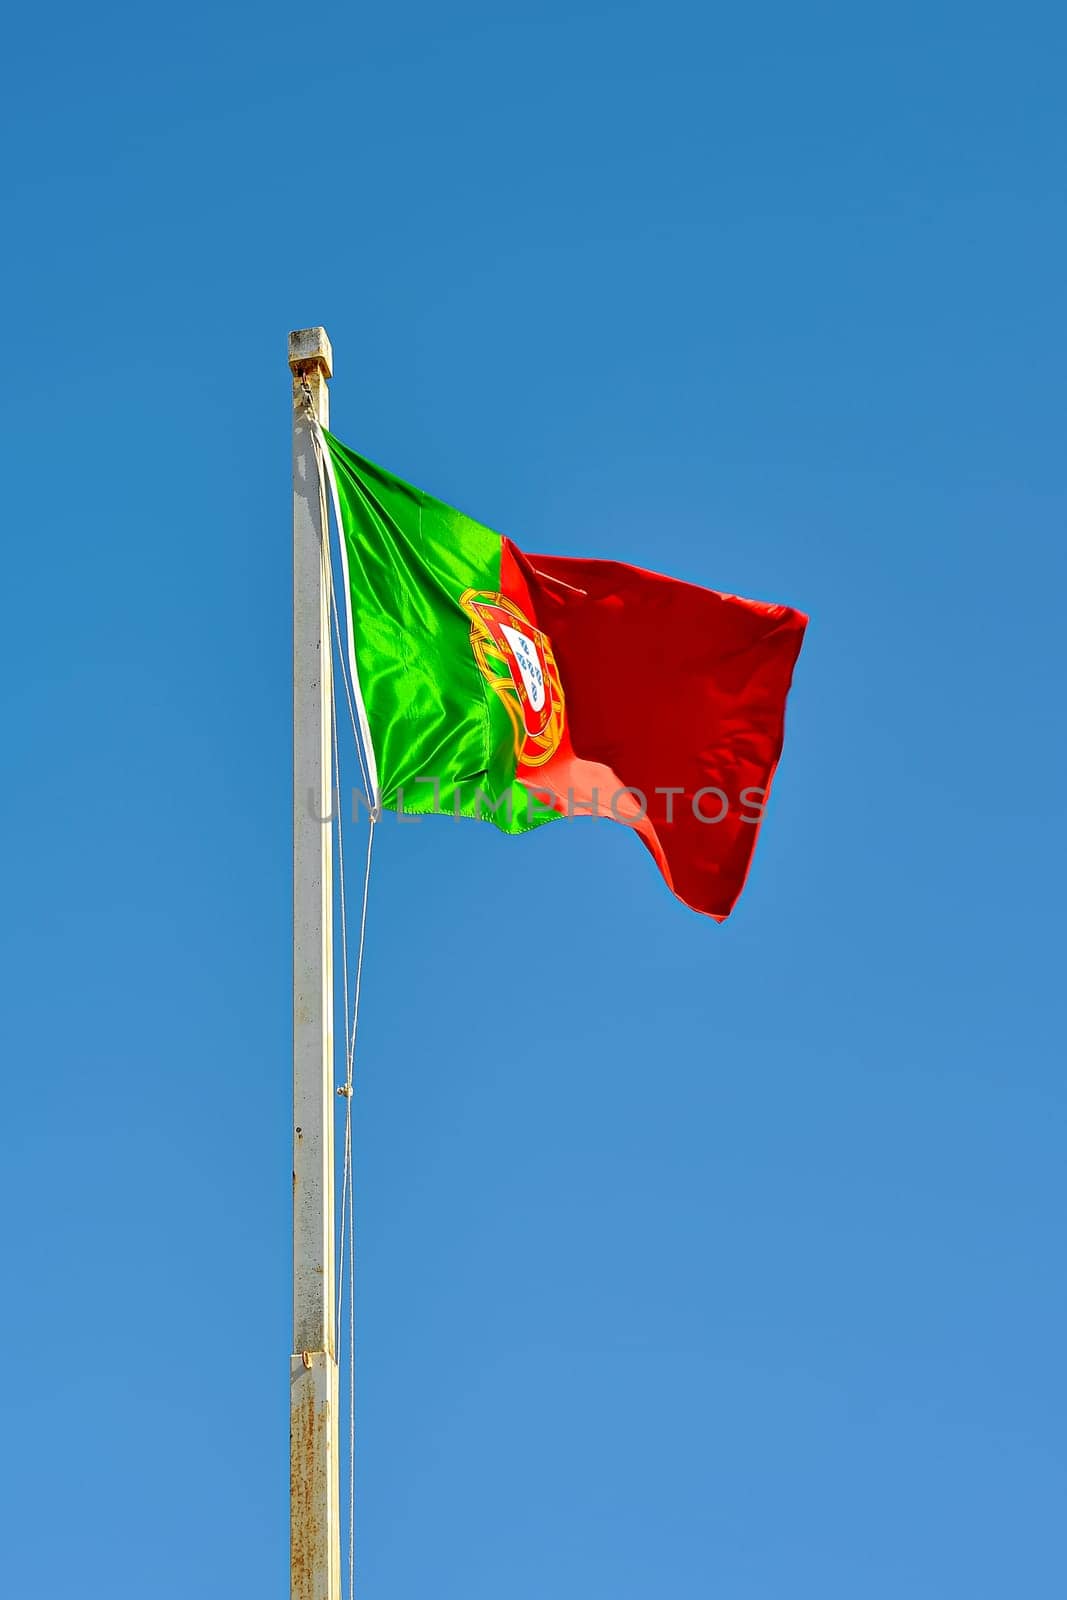 Portuguese flag waving in the wind against blue sky. Portuguese Flag Waving Against Blue Sky. Flag of Portugal waving, against blue sky vertical banner.